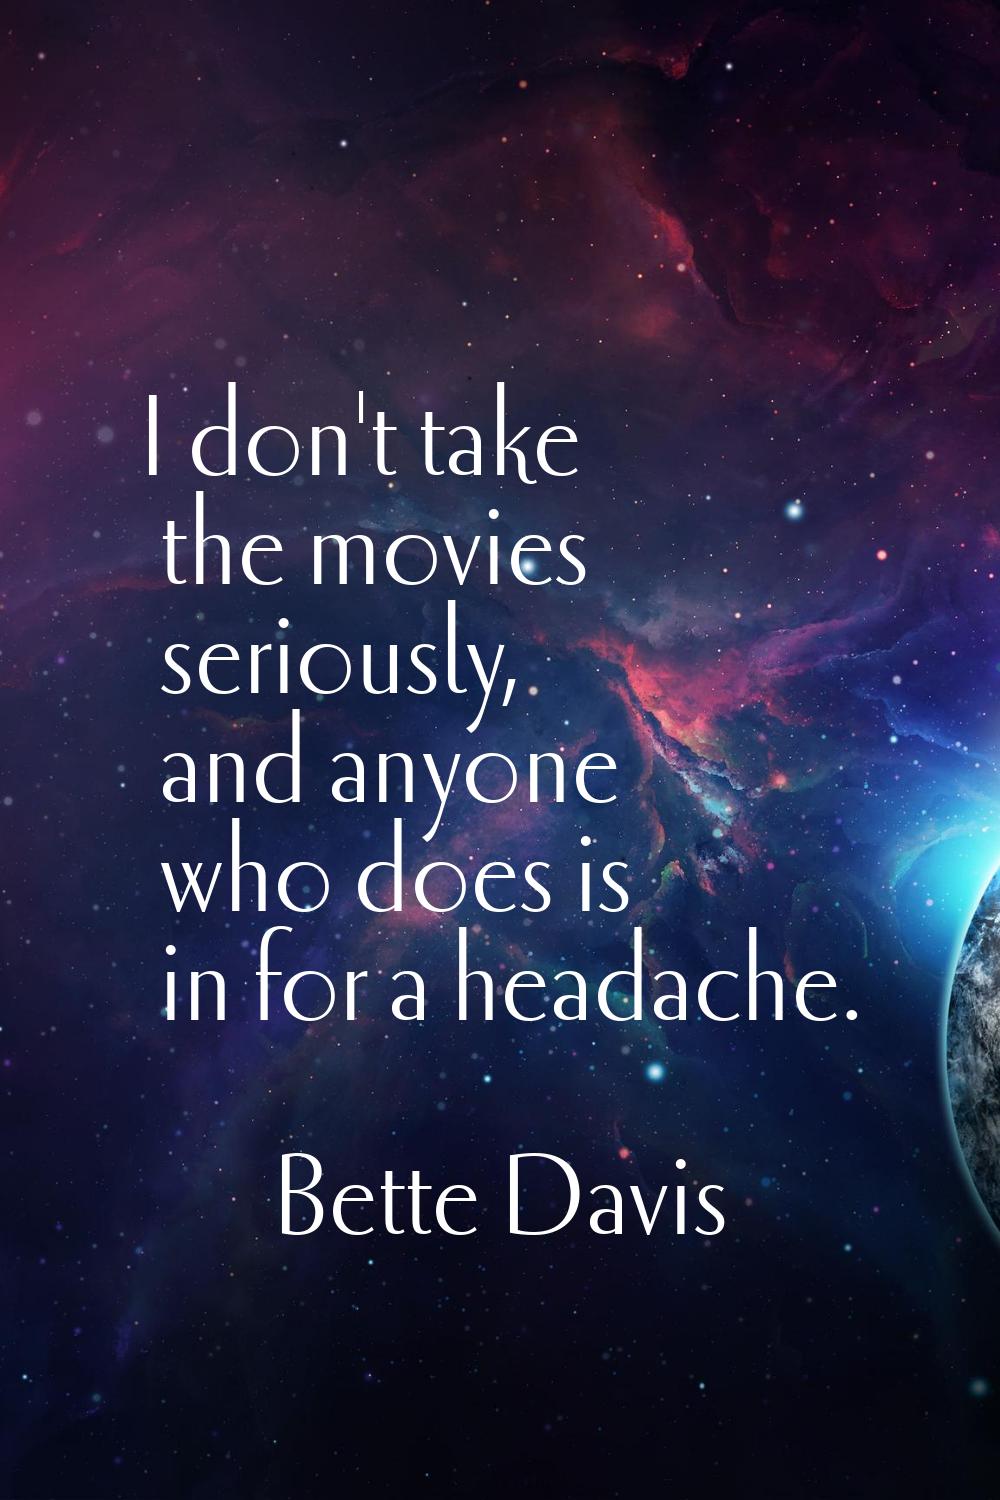 I don't take the movies seriously, and anyone who does is in for a headache.